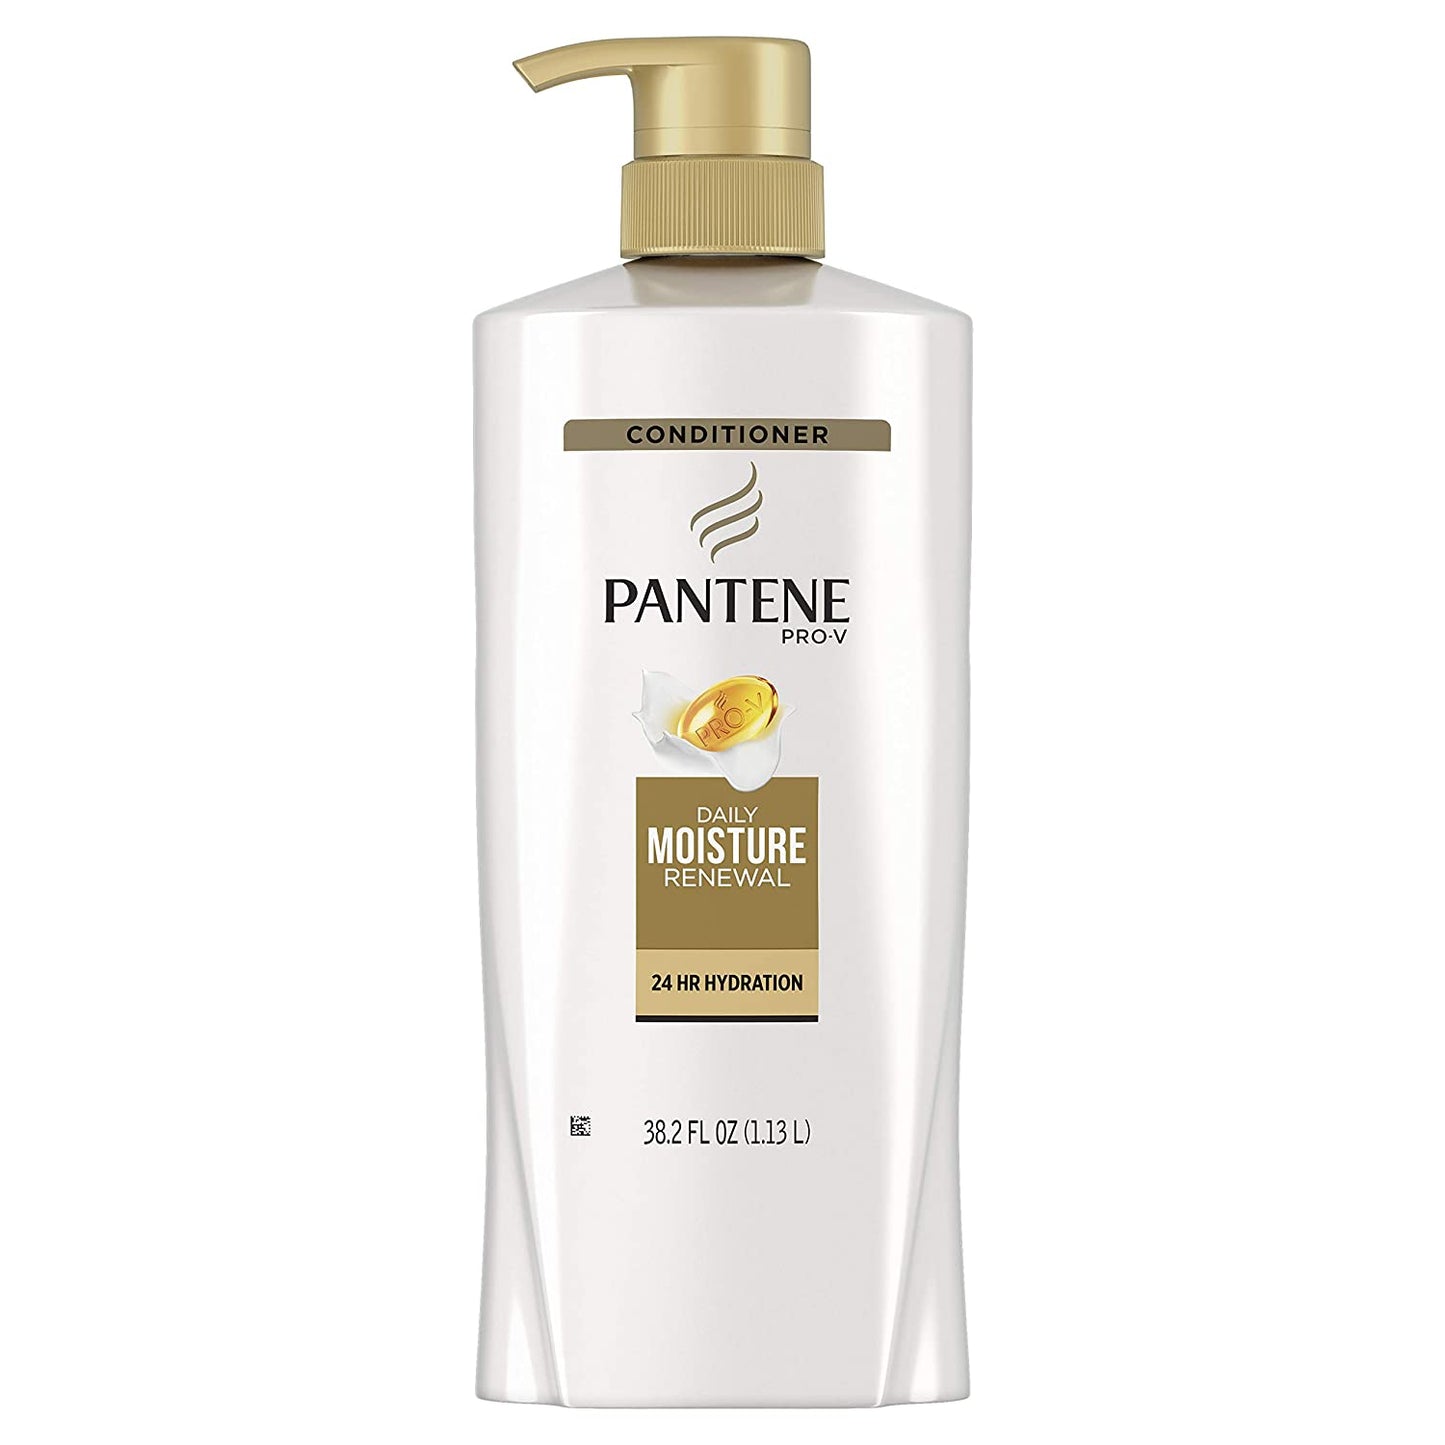 Pantene Pro V Daily Moisture Renewal Conditioner  38.2 fl. oz. With Pump